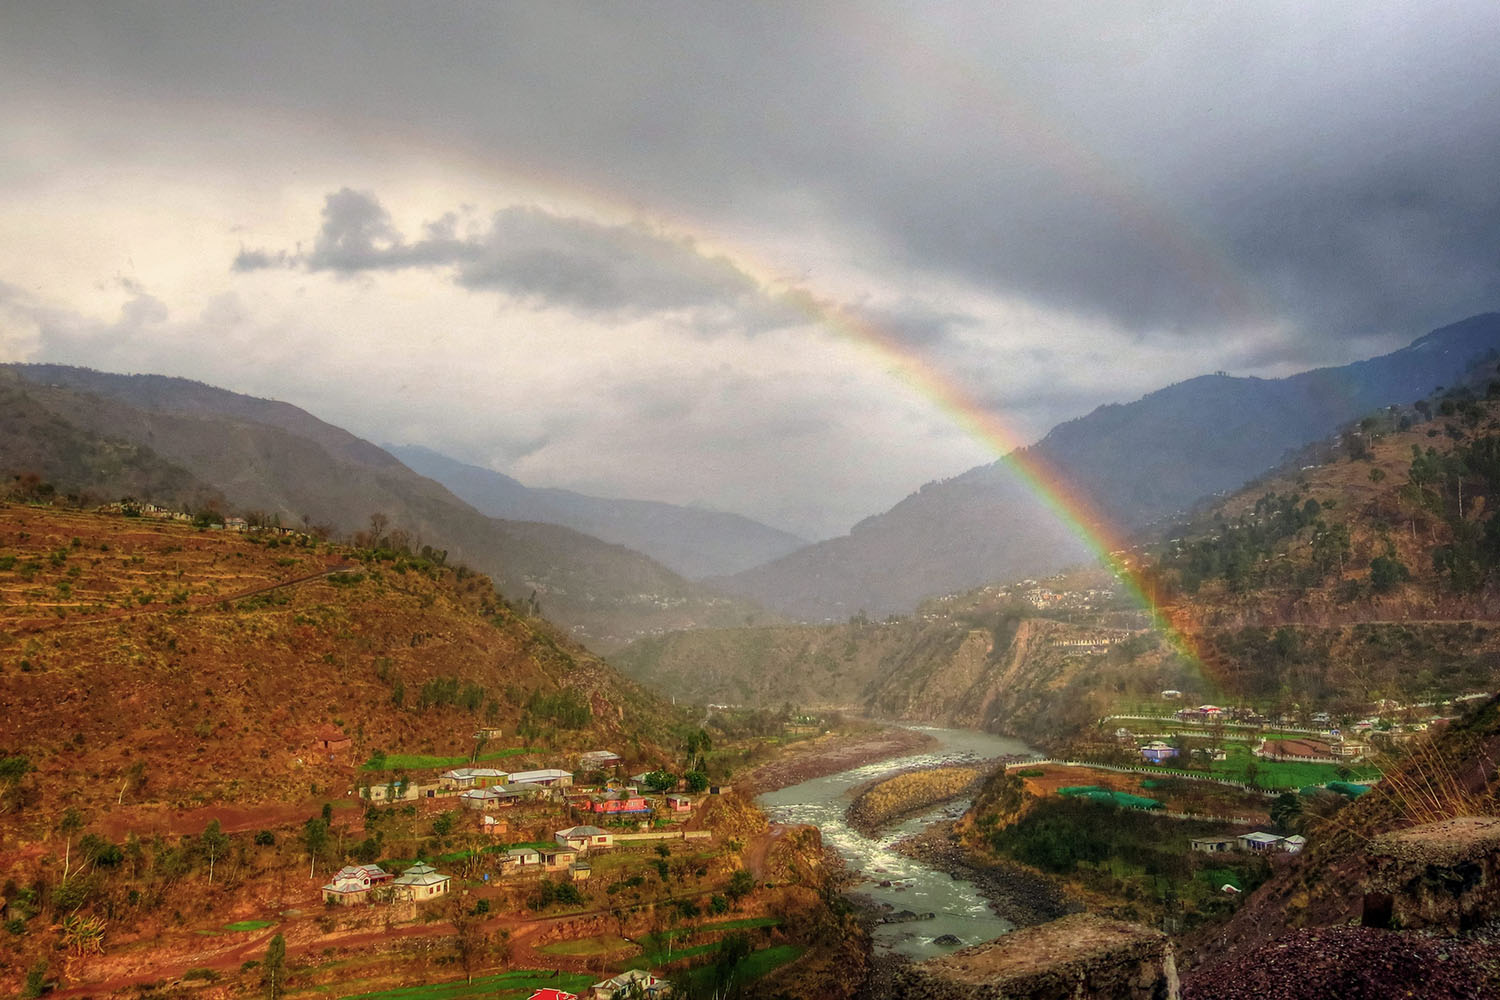 Mar. 4, 2014. The 'end of a rainbow' appears to touch the ground in Muzaffarabad, the capital of Pakistani administered Kashmir.